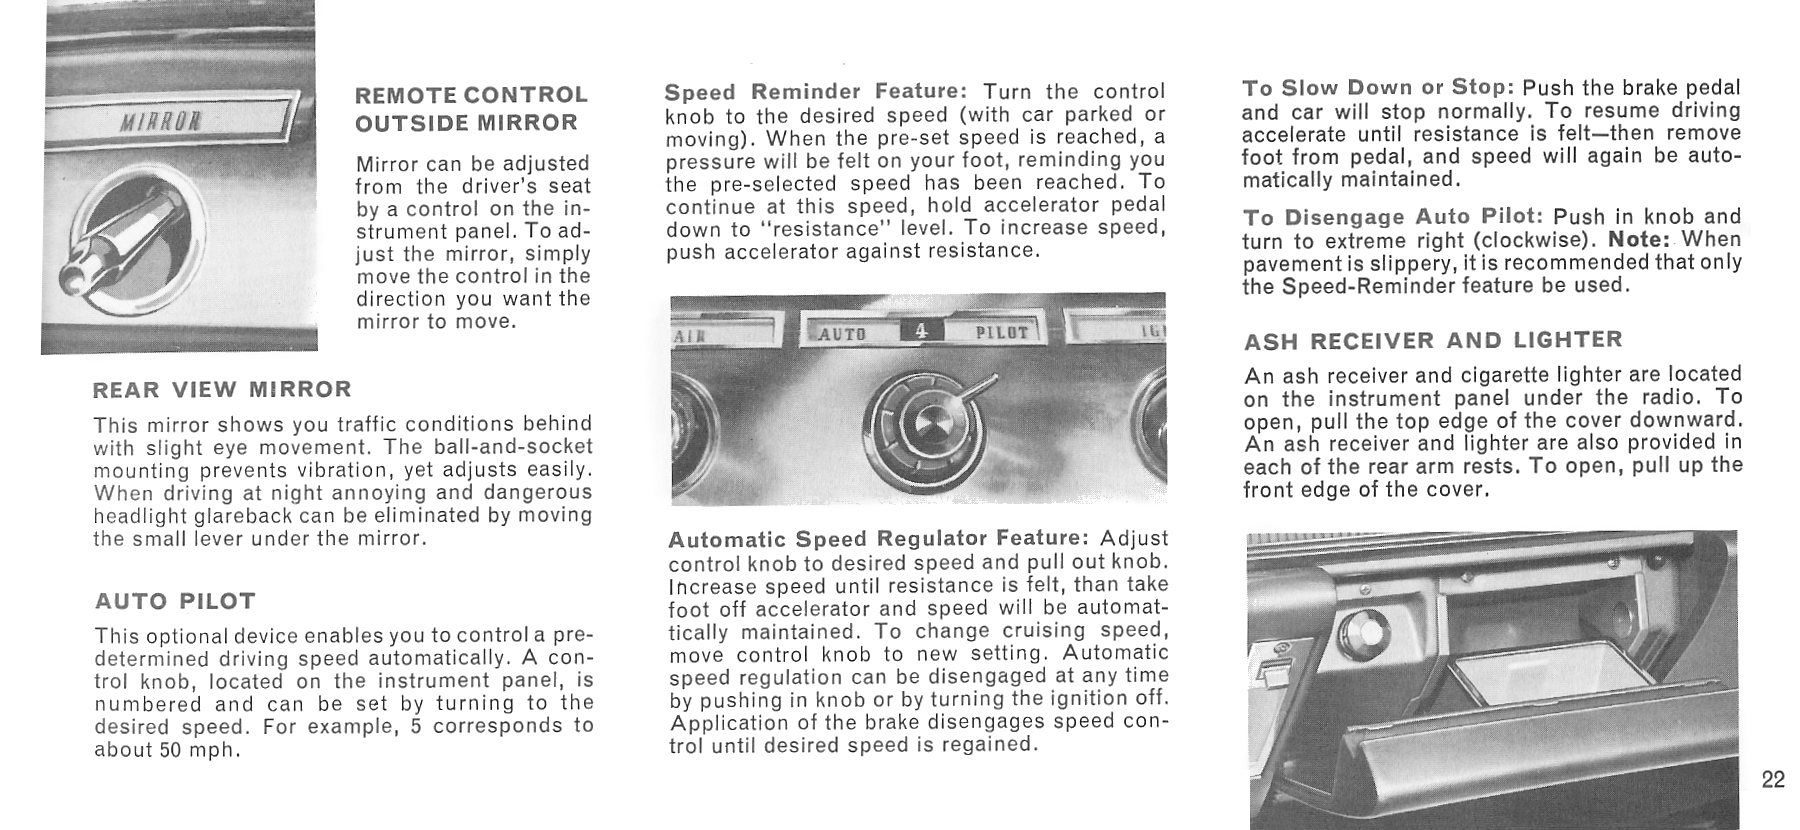 1965 Chrysler Imperial Owners Manual Page 38